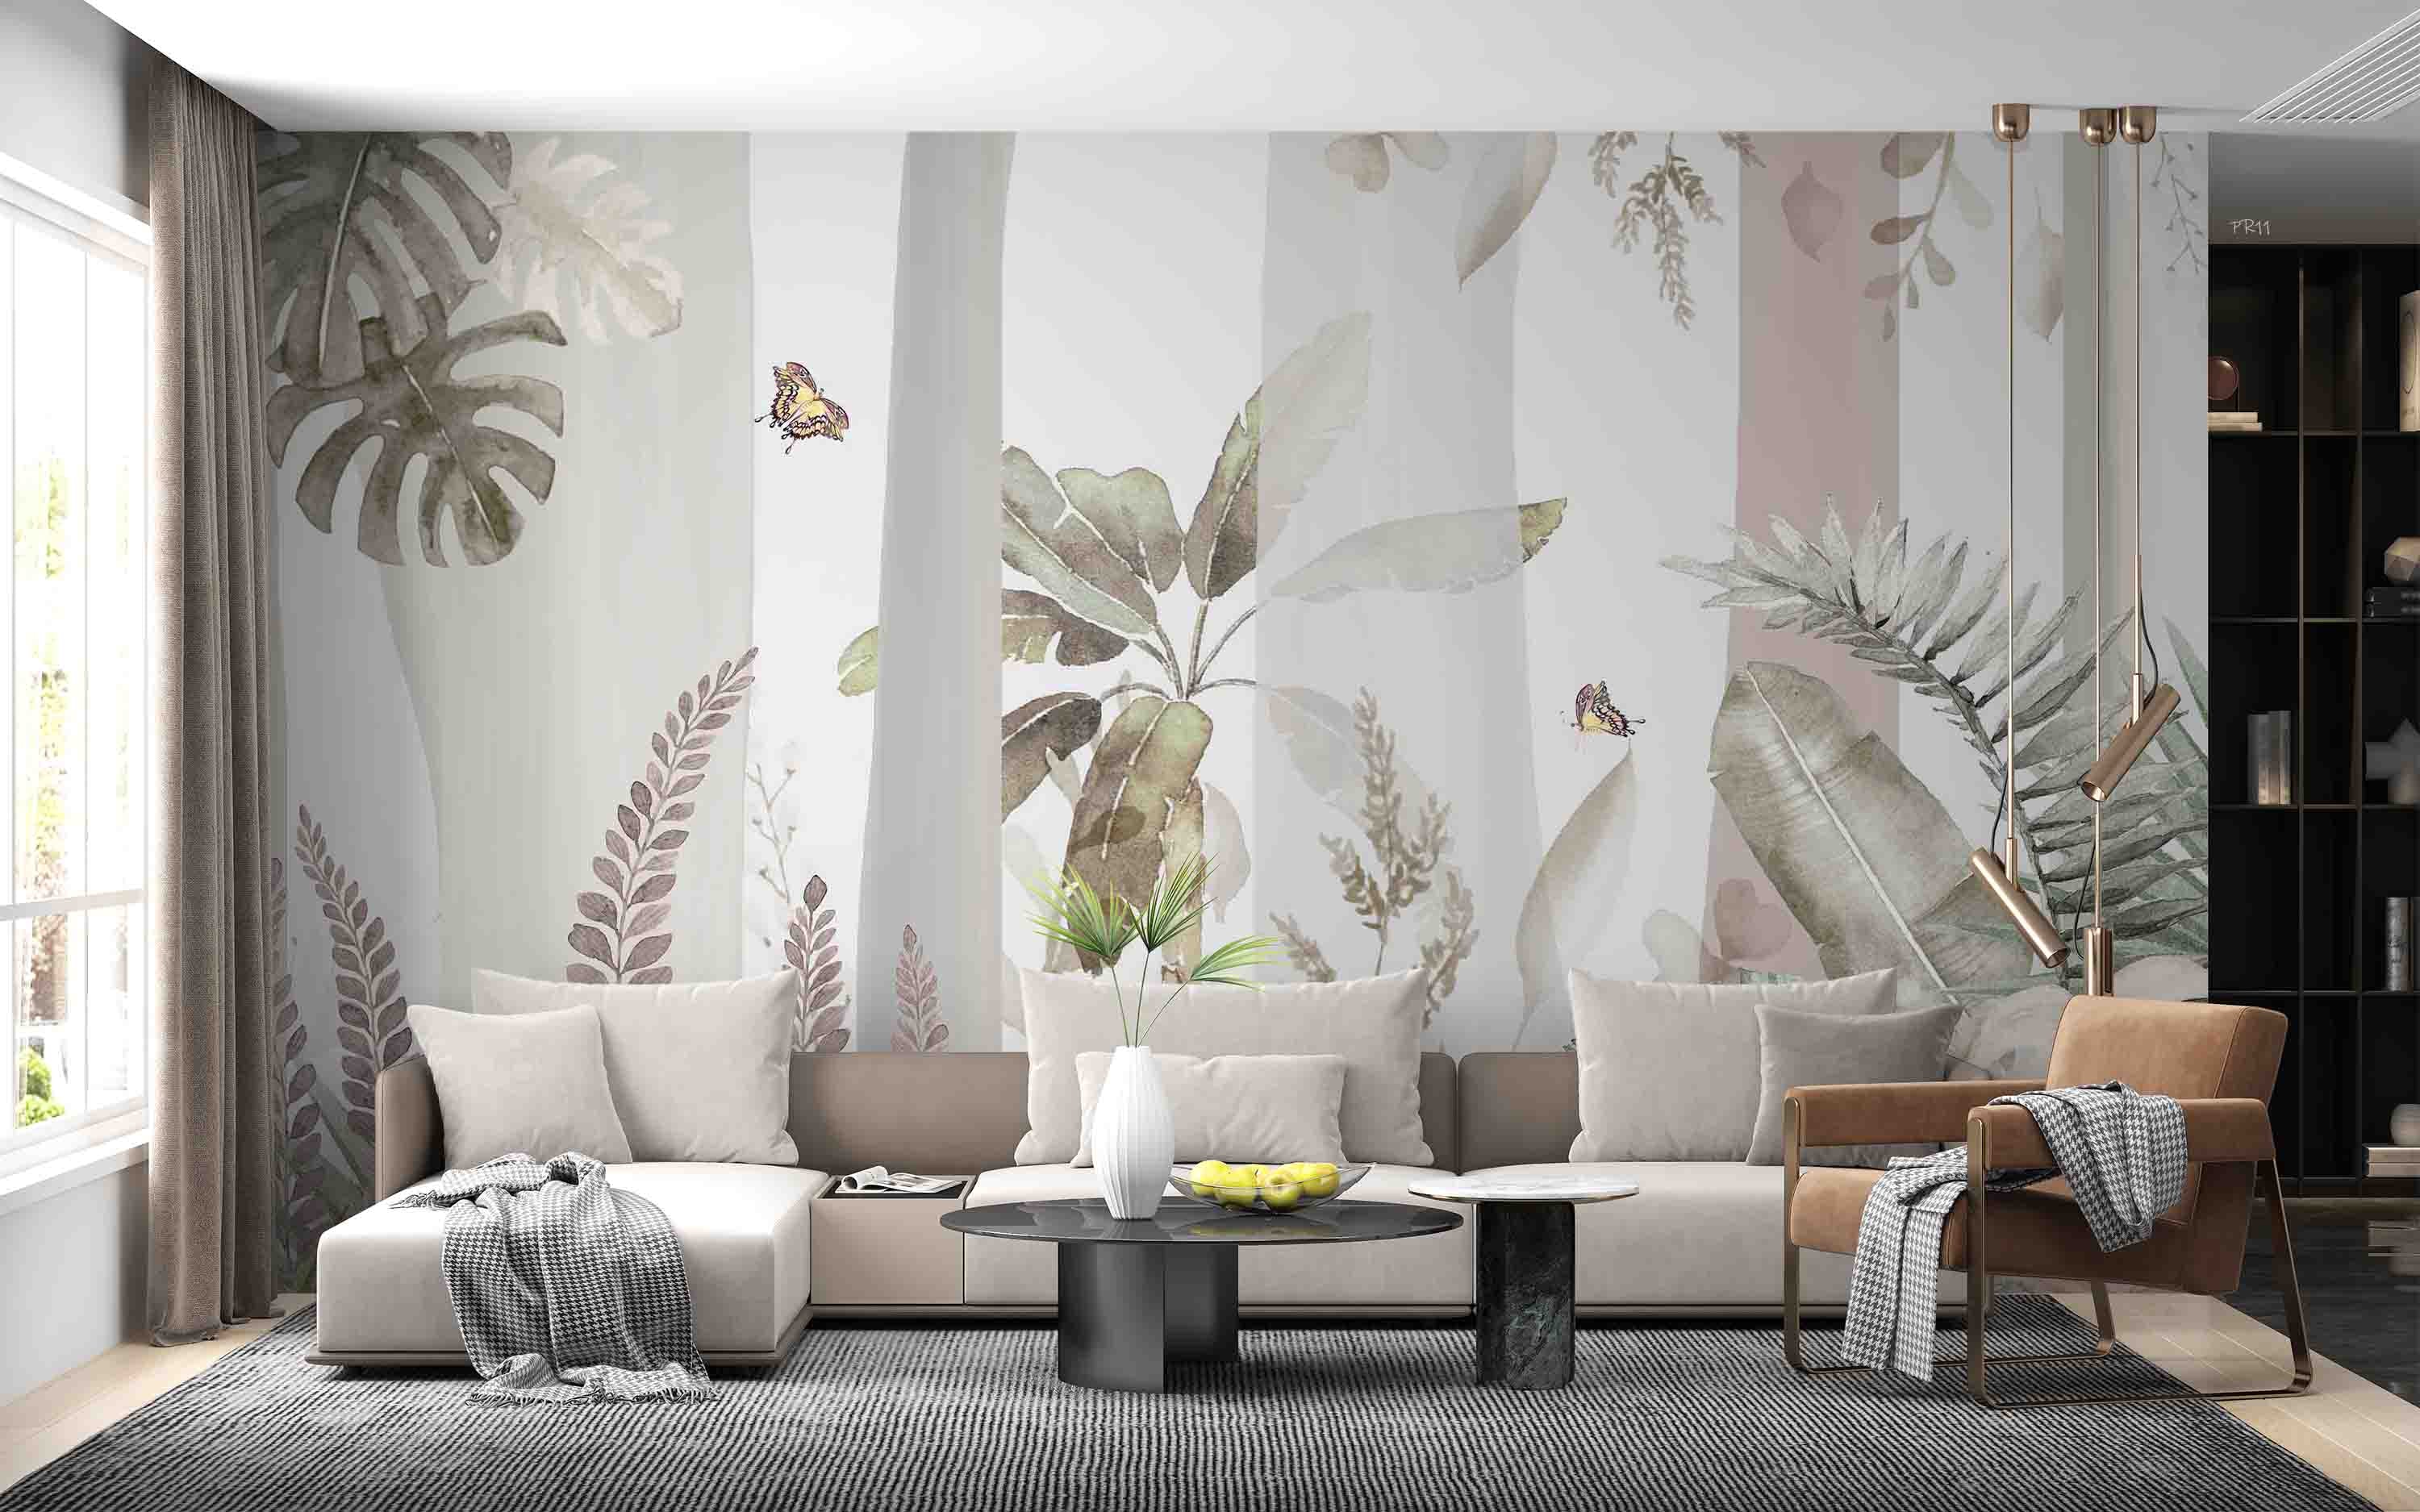 3D Vintage Tropical Plant Leaves Butterfly Wall Mural Wallpaper GD 4829- Jess Art Decoration